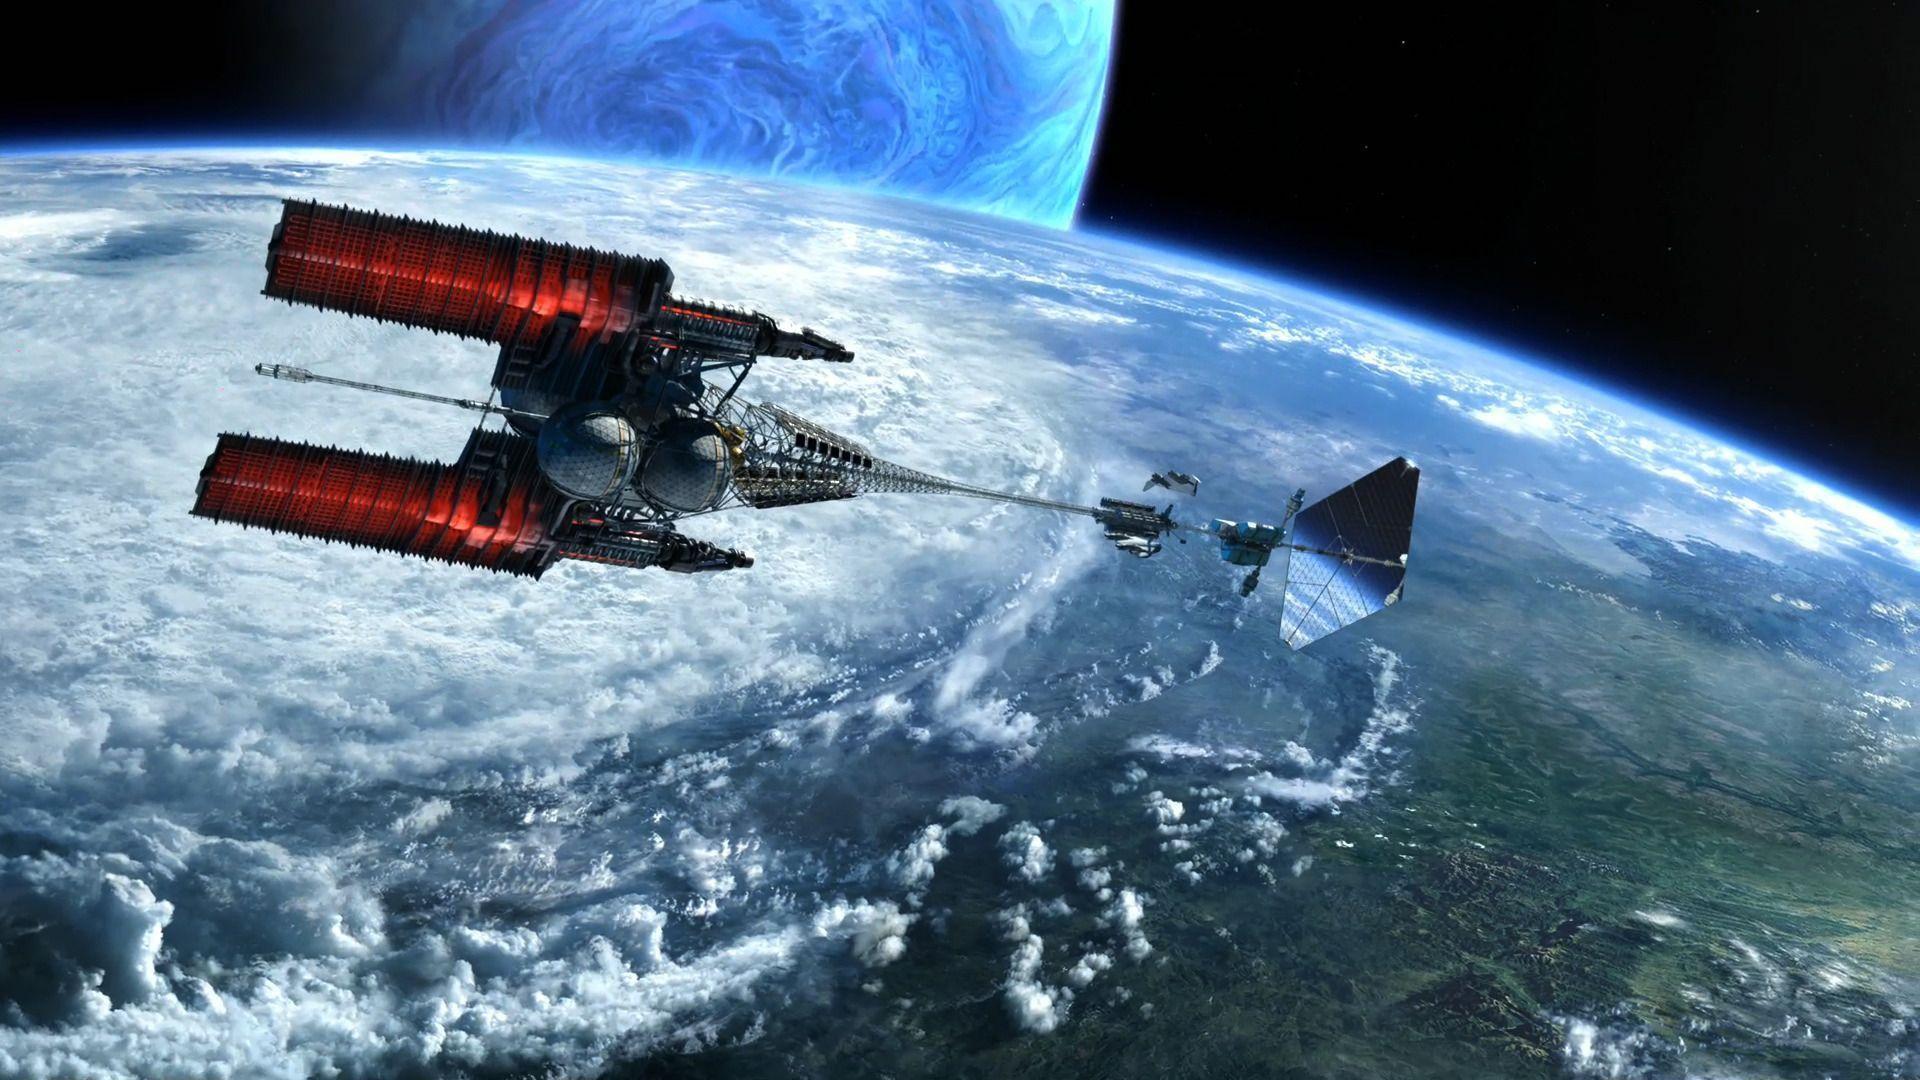 avatar movie space ships wallpaper Search Engine